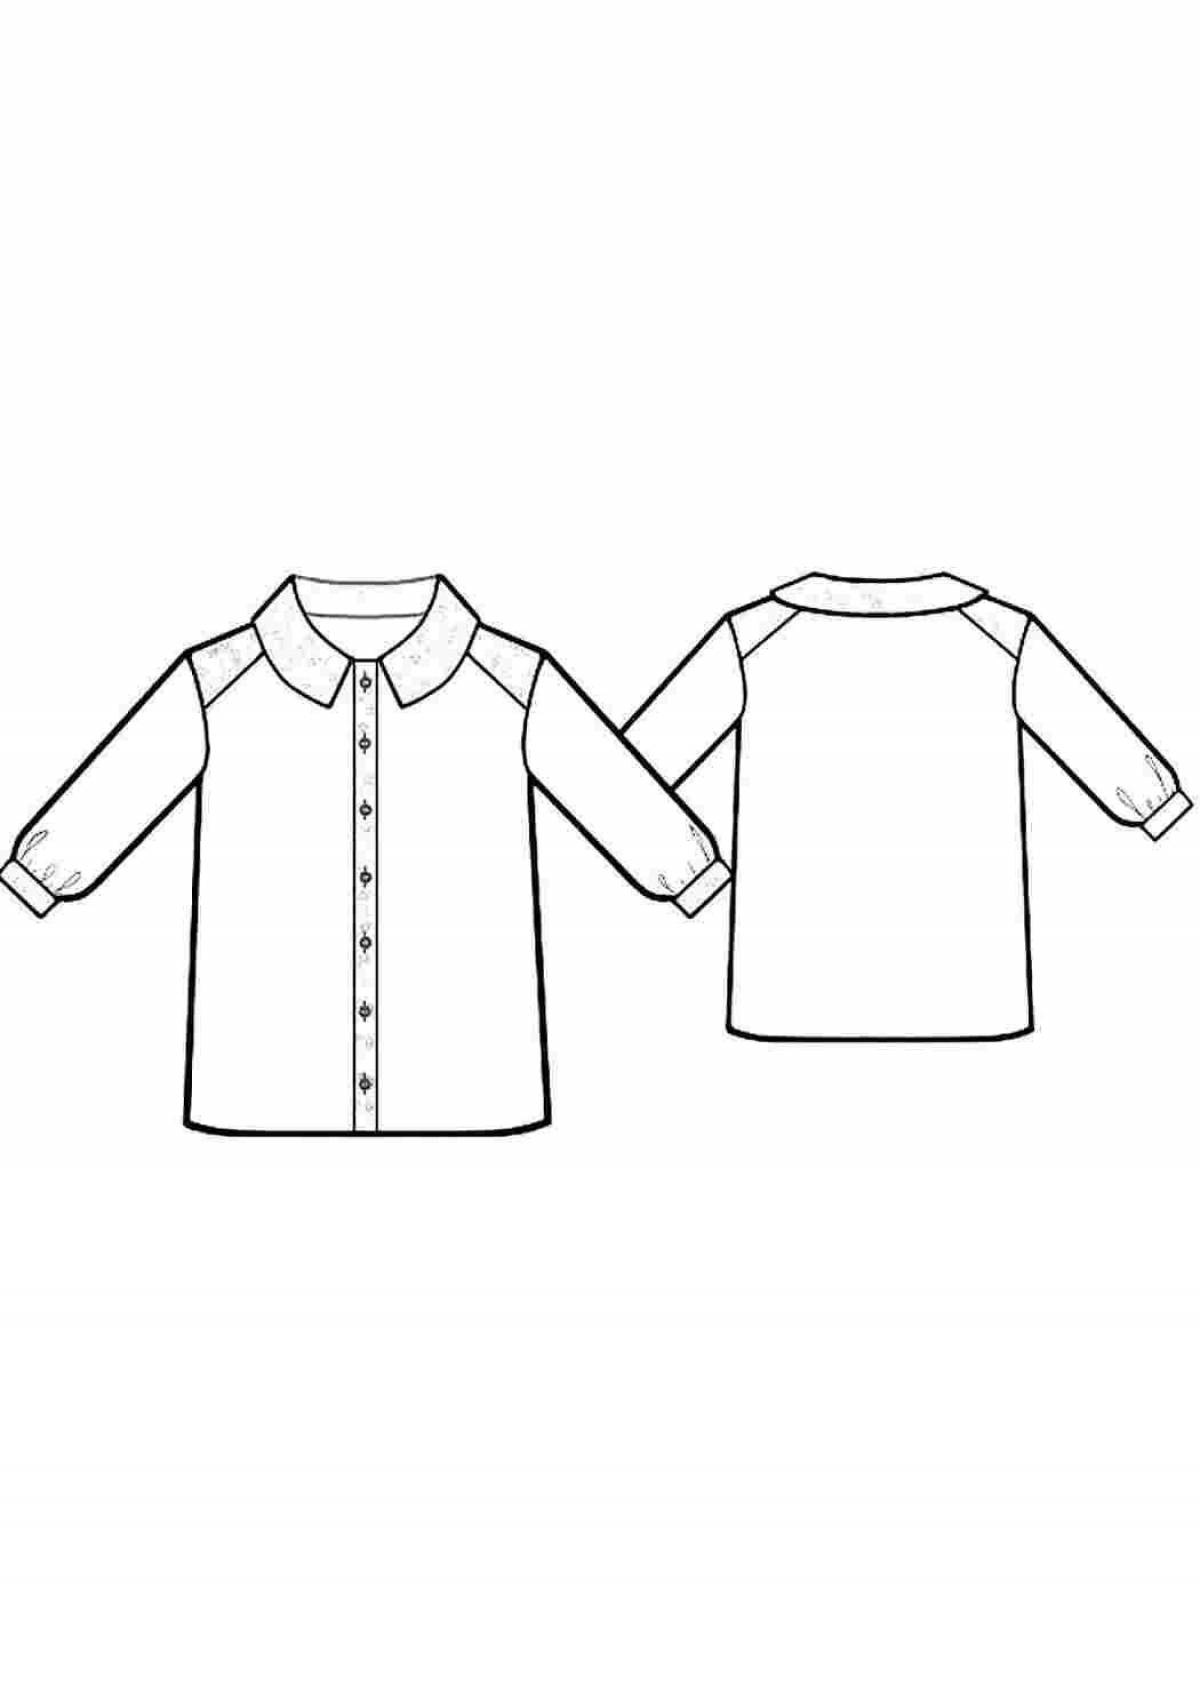 Interesting shirt coloring page for 4-5 year olds